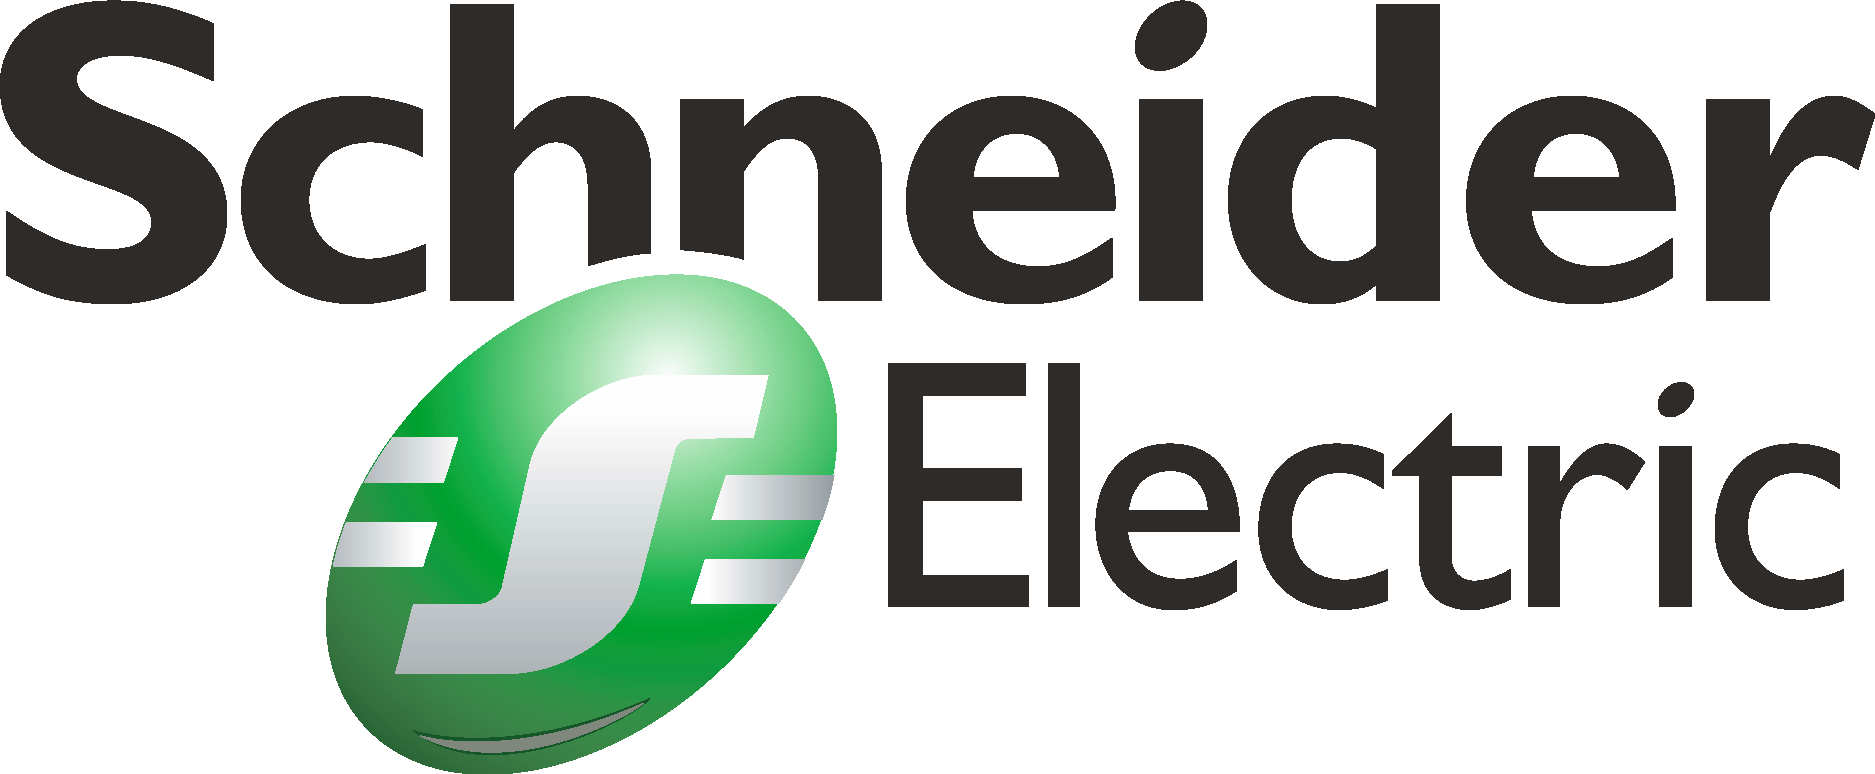 Schneider Electric ESS Receives Awards for Top Product and Top Project of  2019